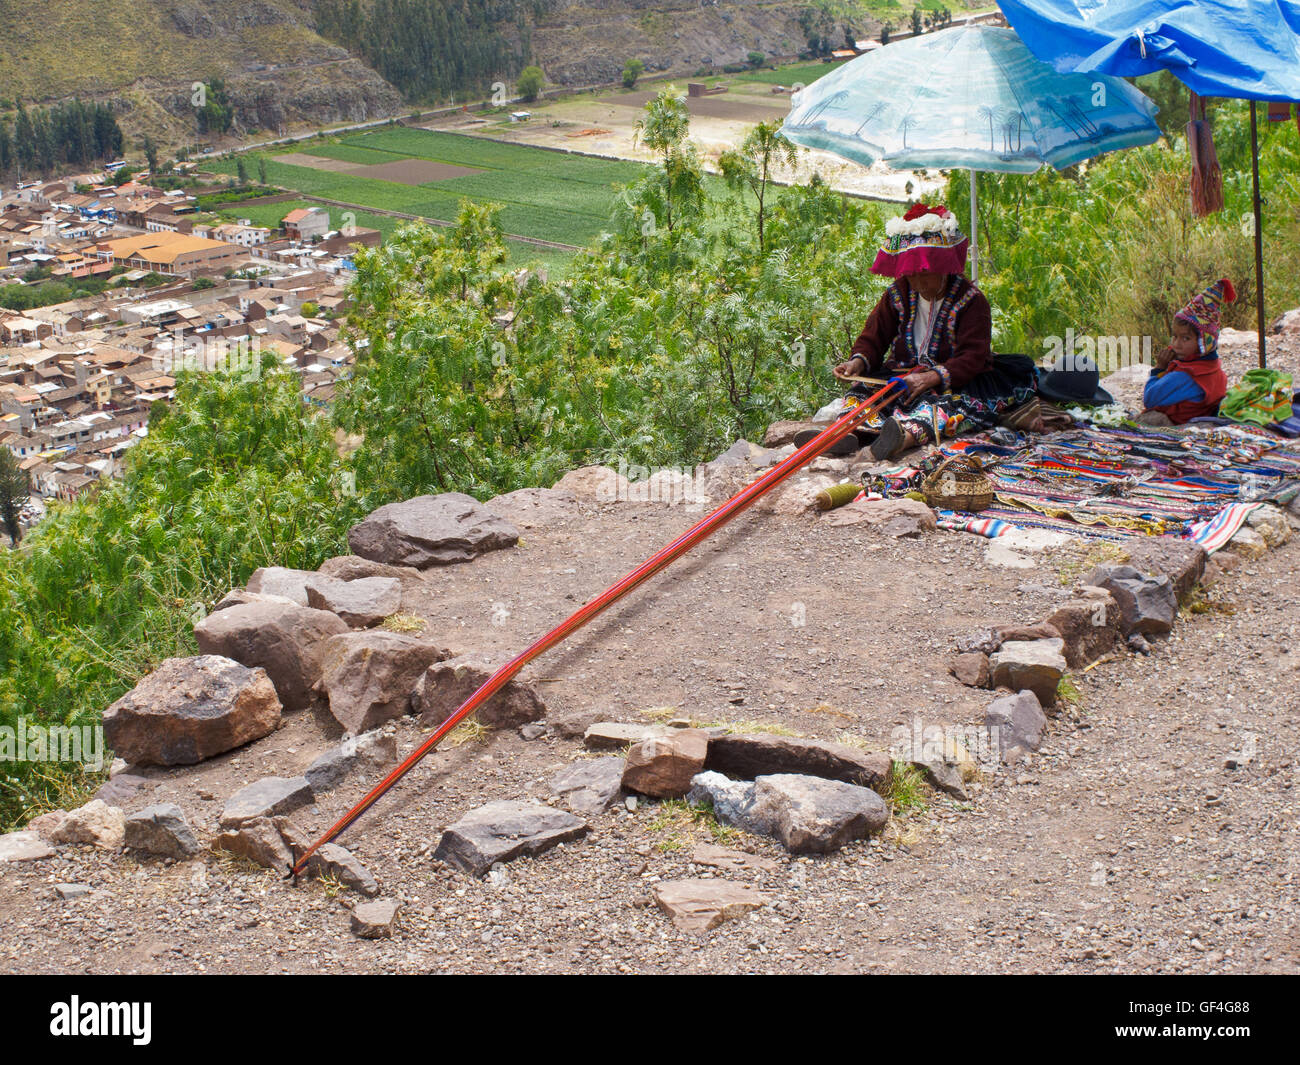 A local Andean woman weaving and selling her handicraft at the valley viewpoint Stock Photo